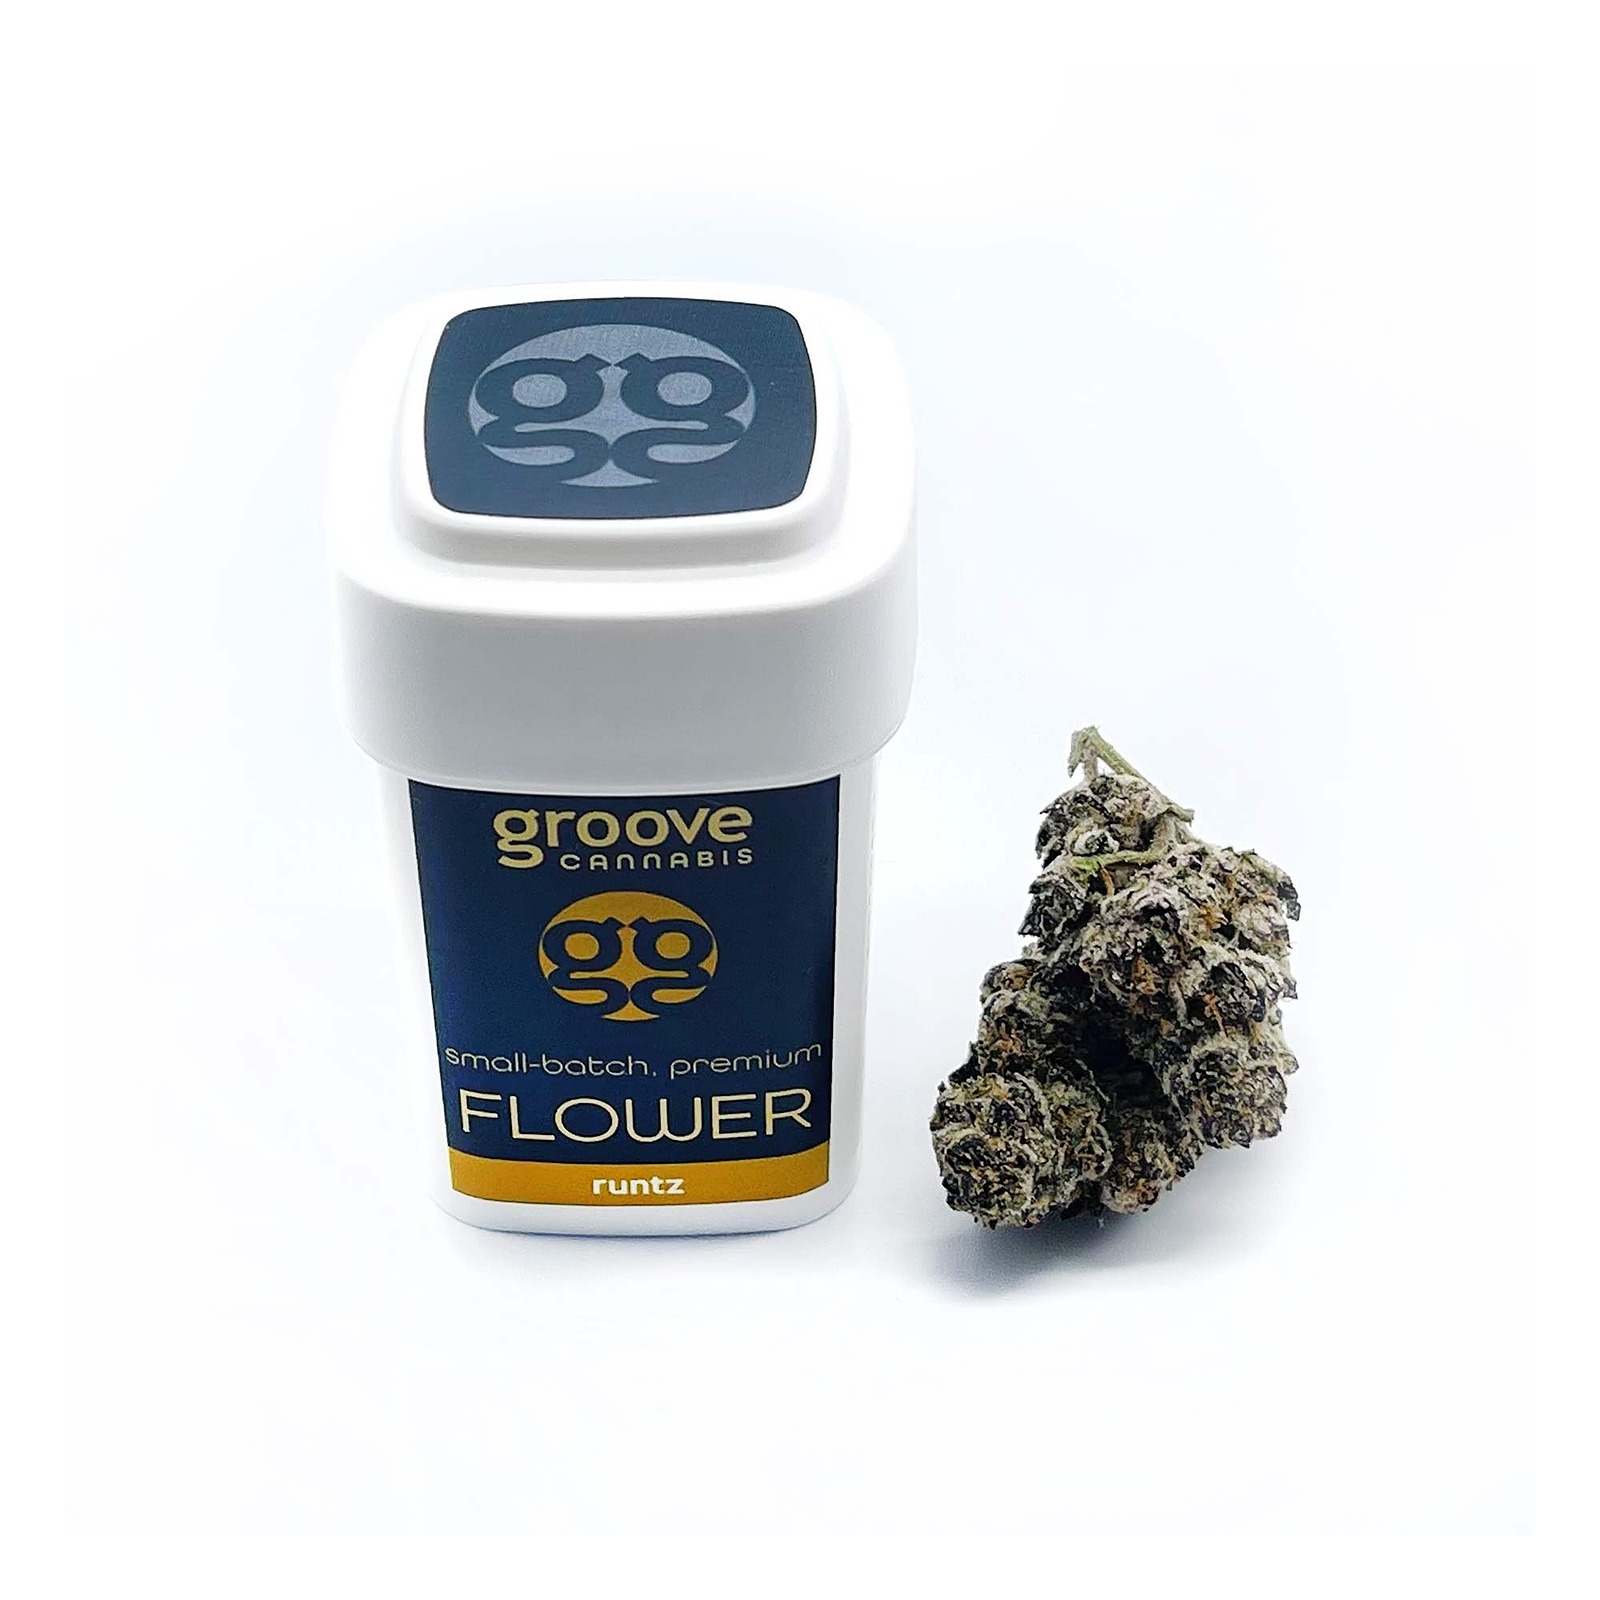 Elevate Your Experience with Solventless Cannabis at Groove